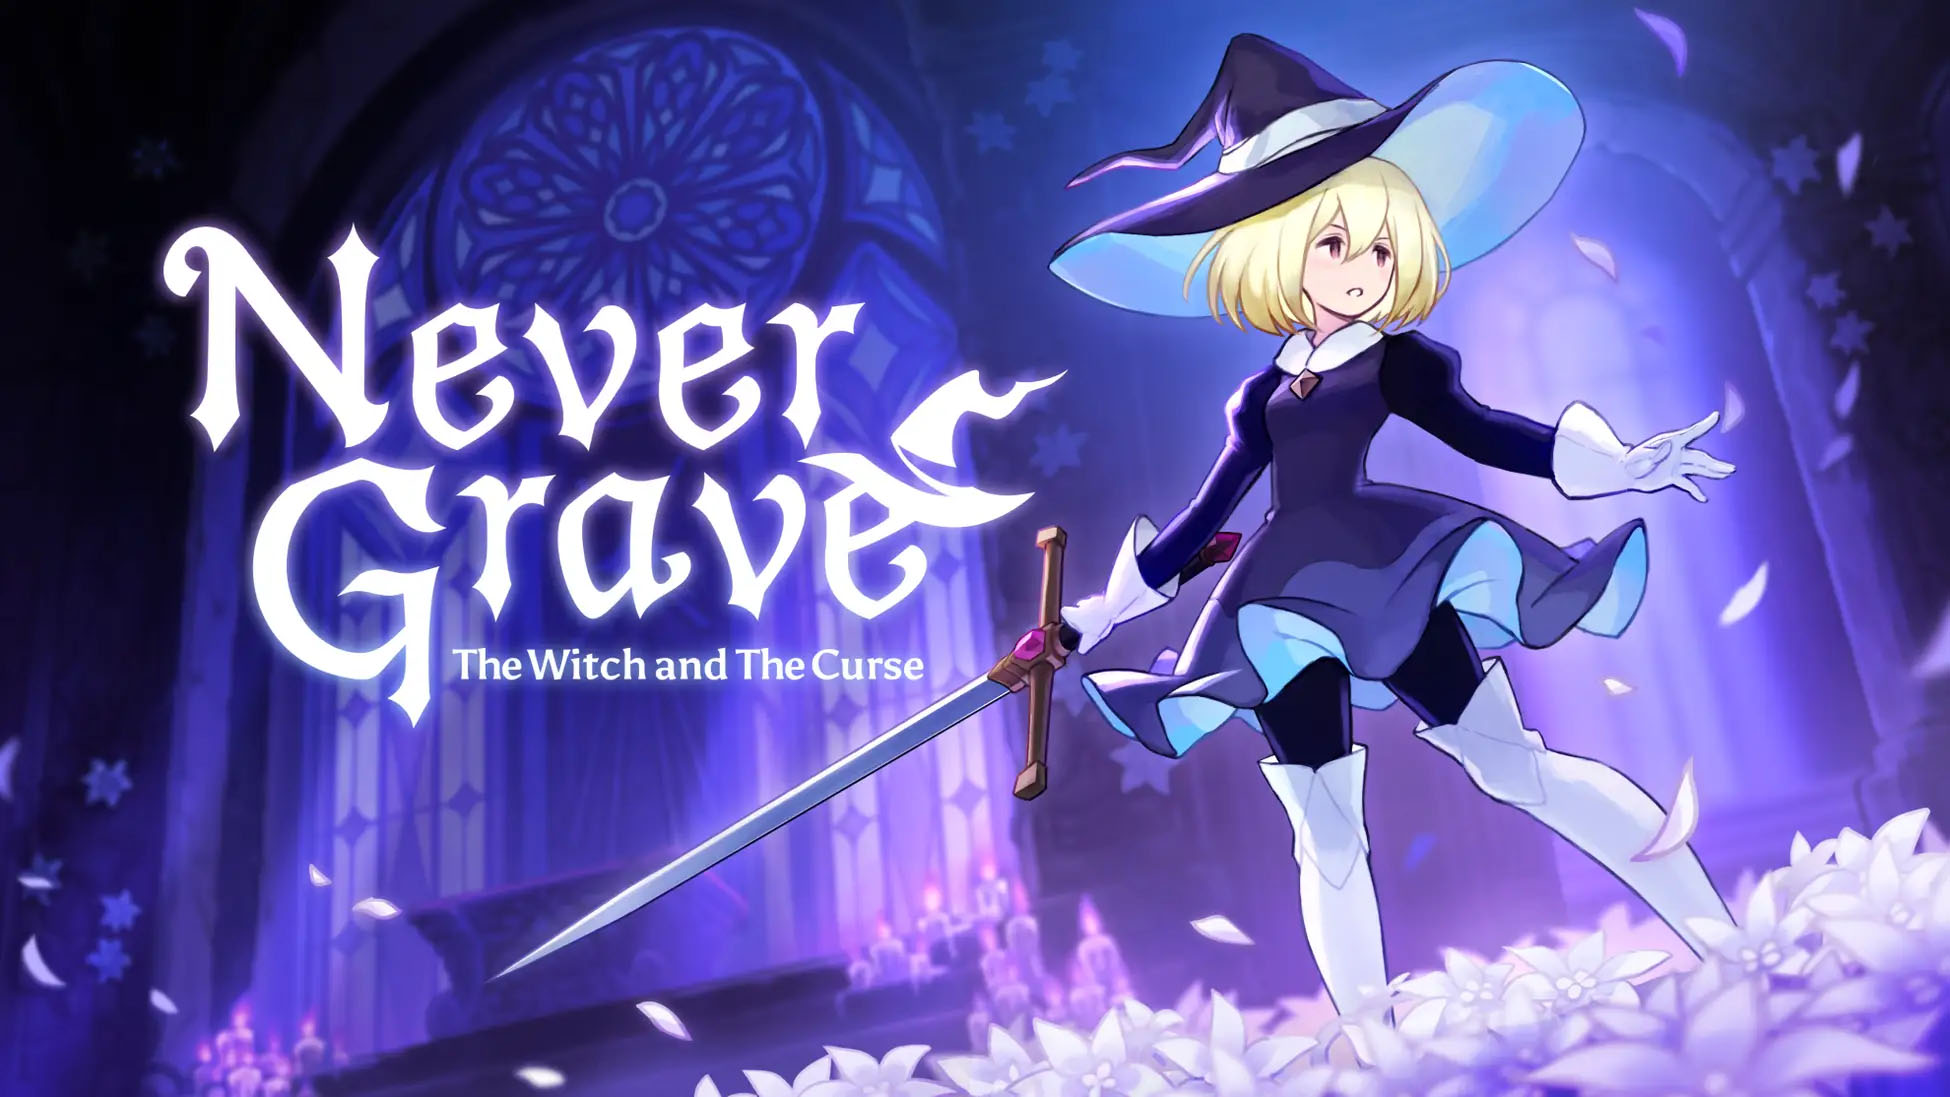 Pocket Pair announces their first 2D game Never Grave: The Witch and The Curse